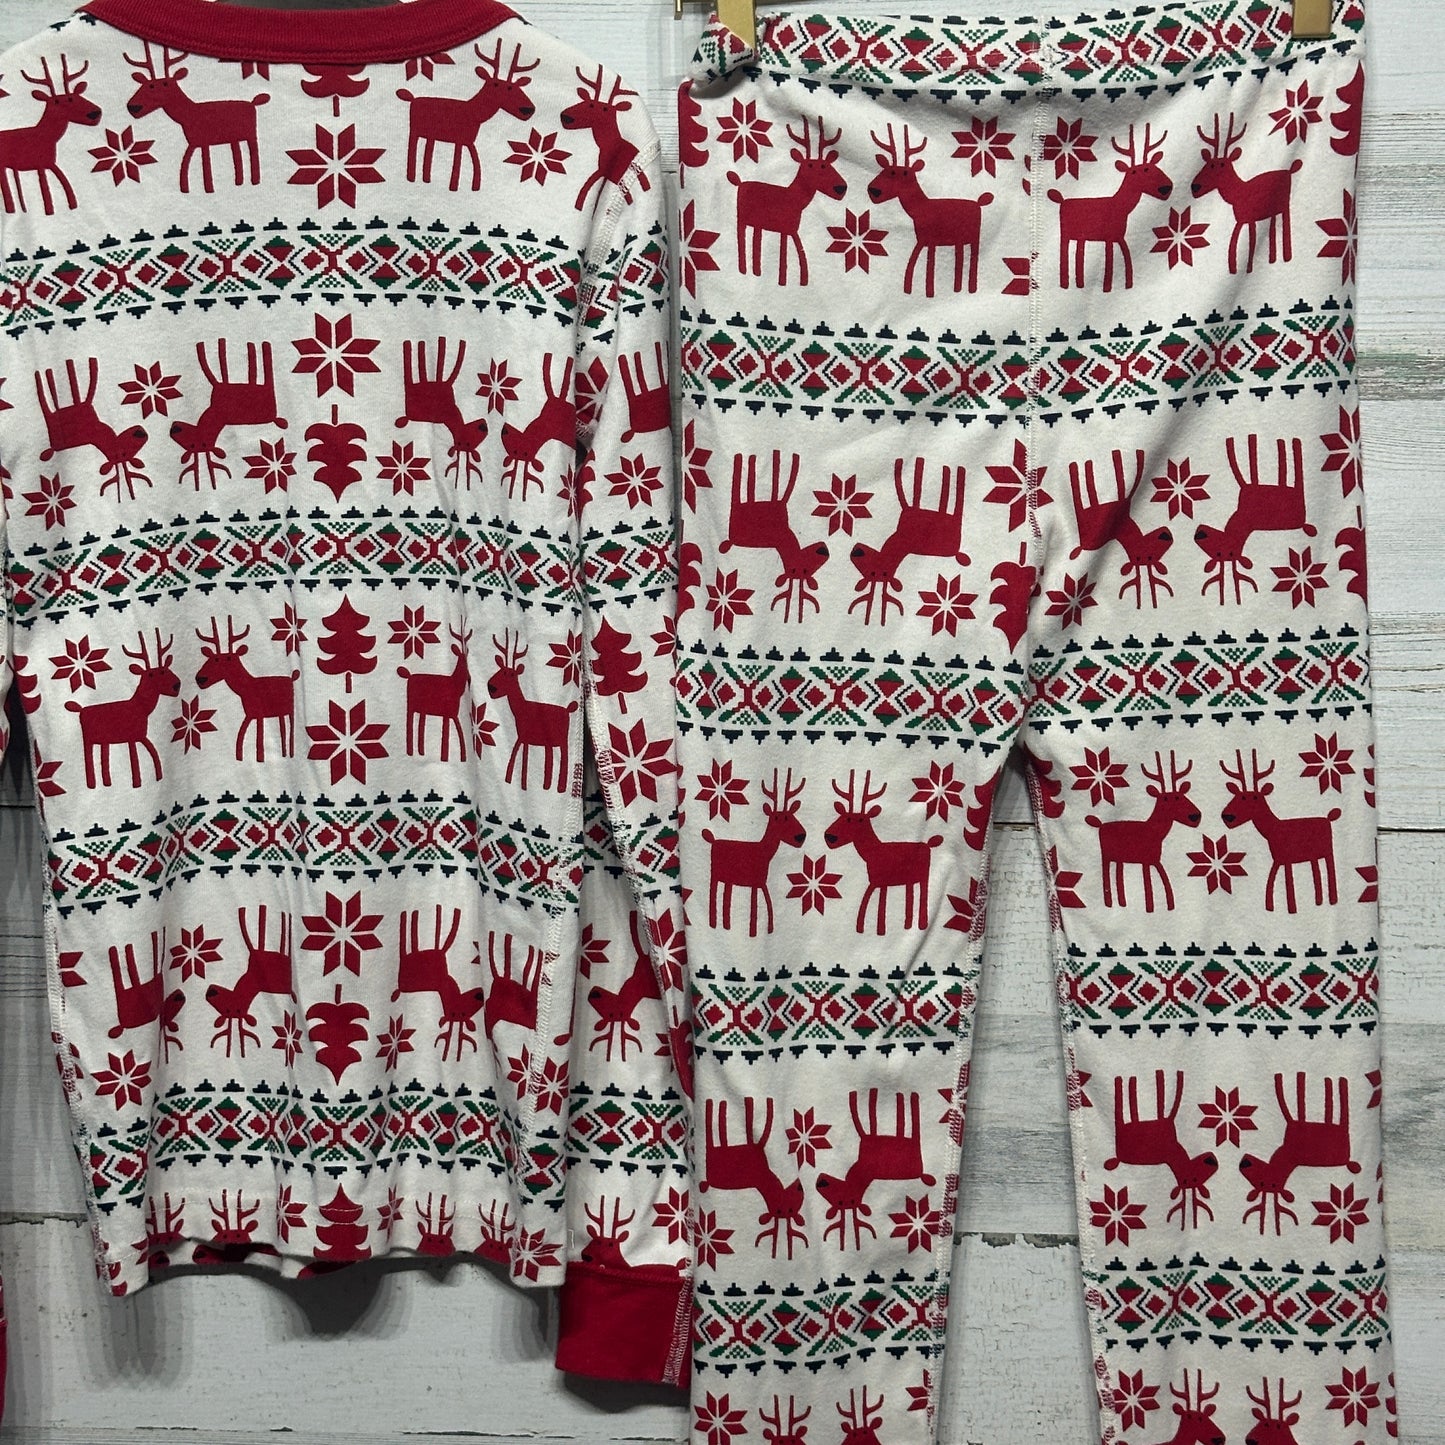 Size 12 Hanna Andersson Holiday Reindeer Two Piece PJ Set - Good Used Condition